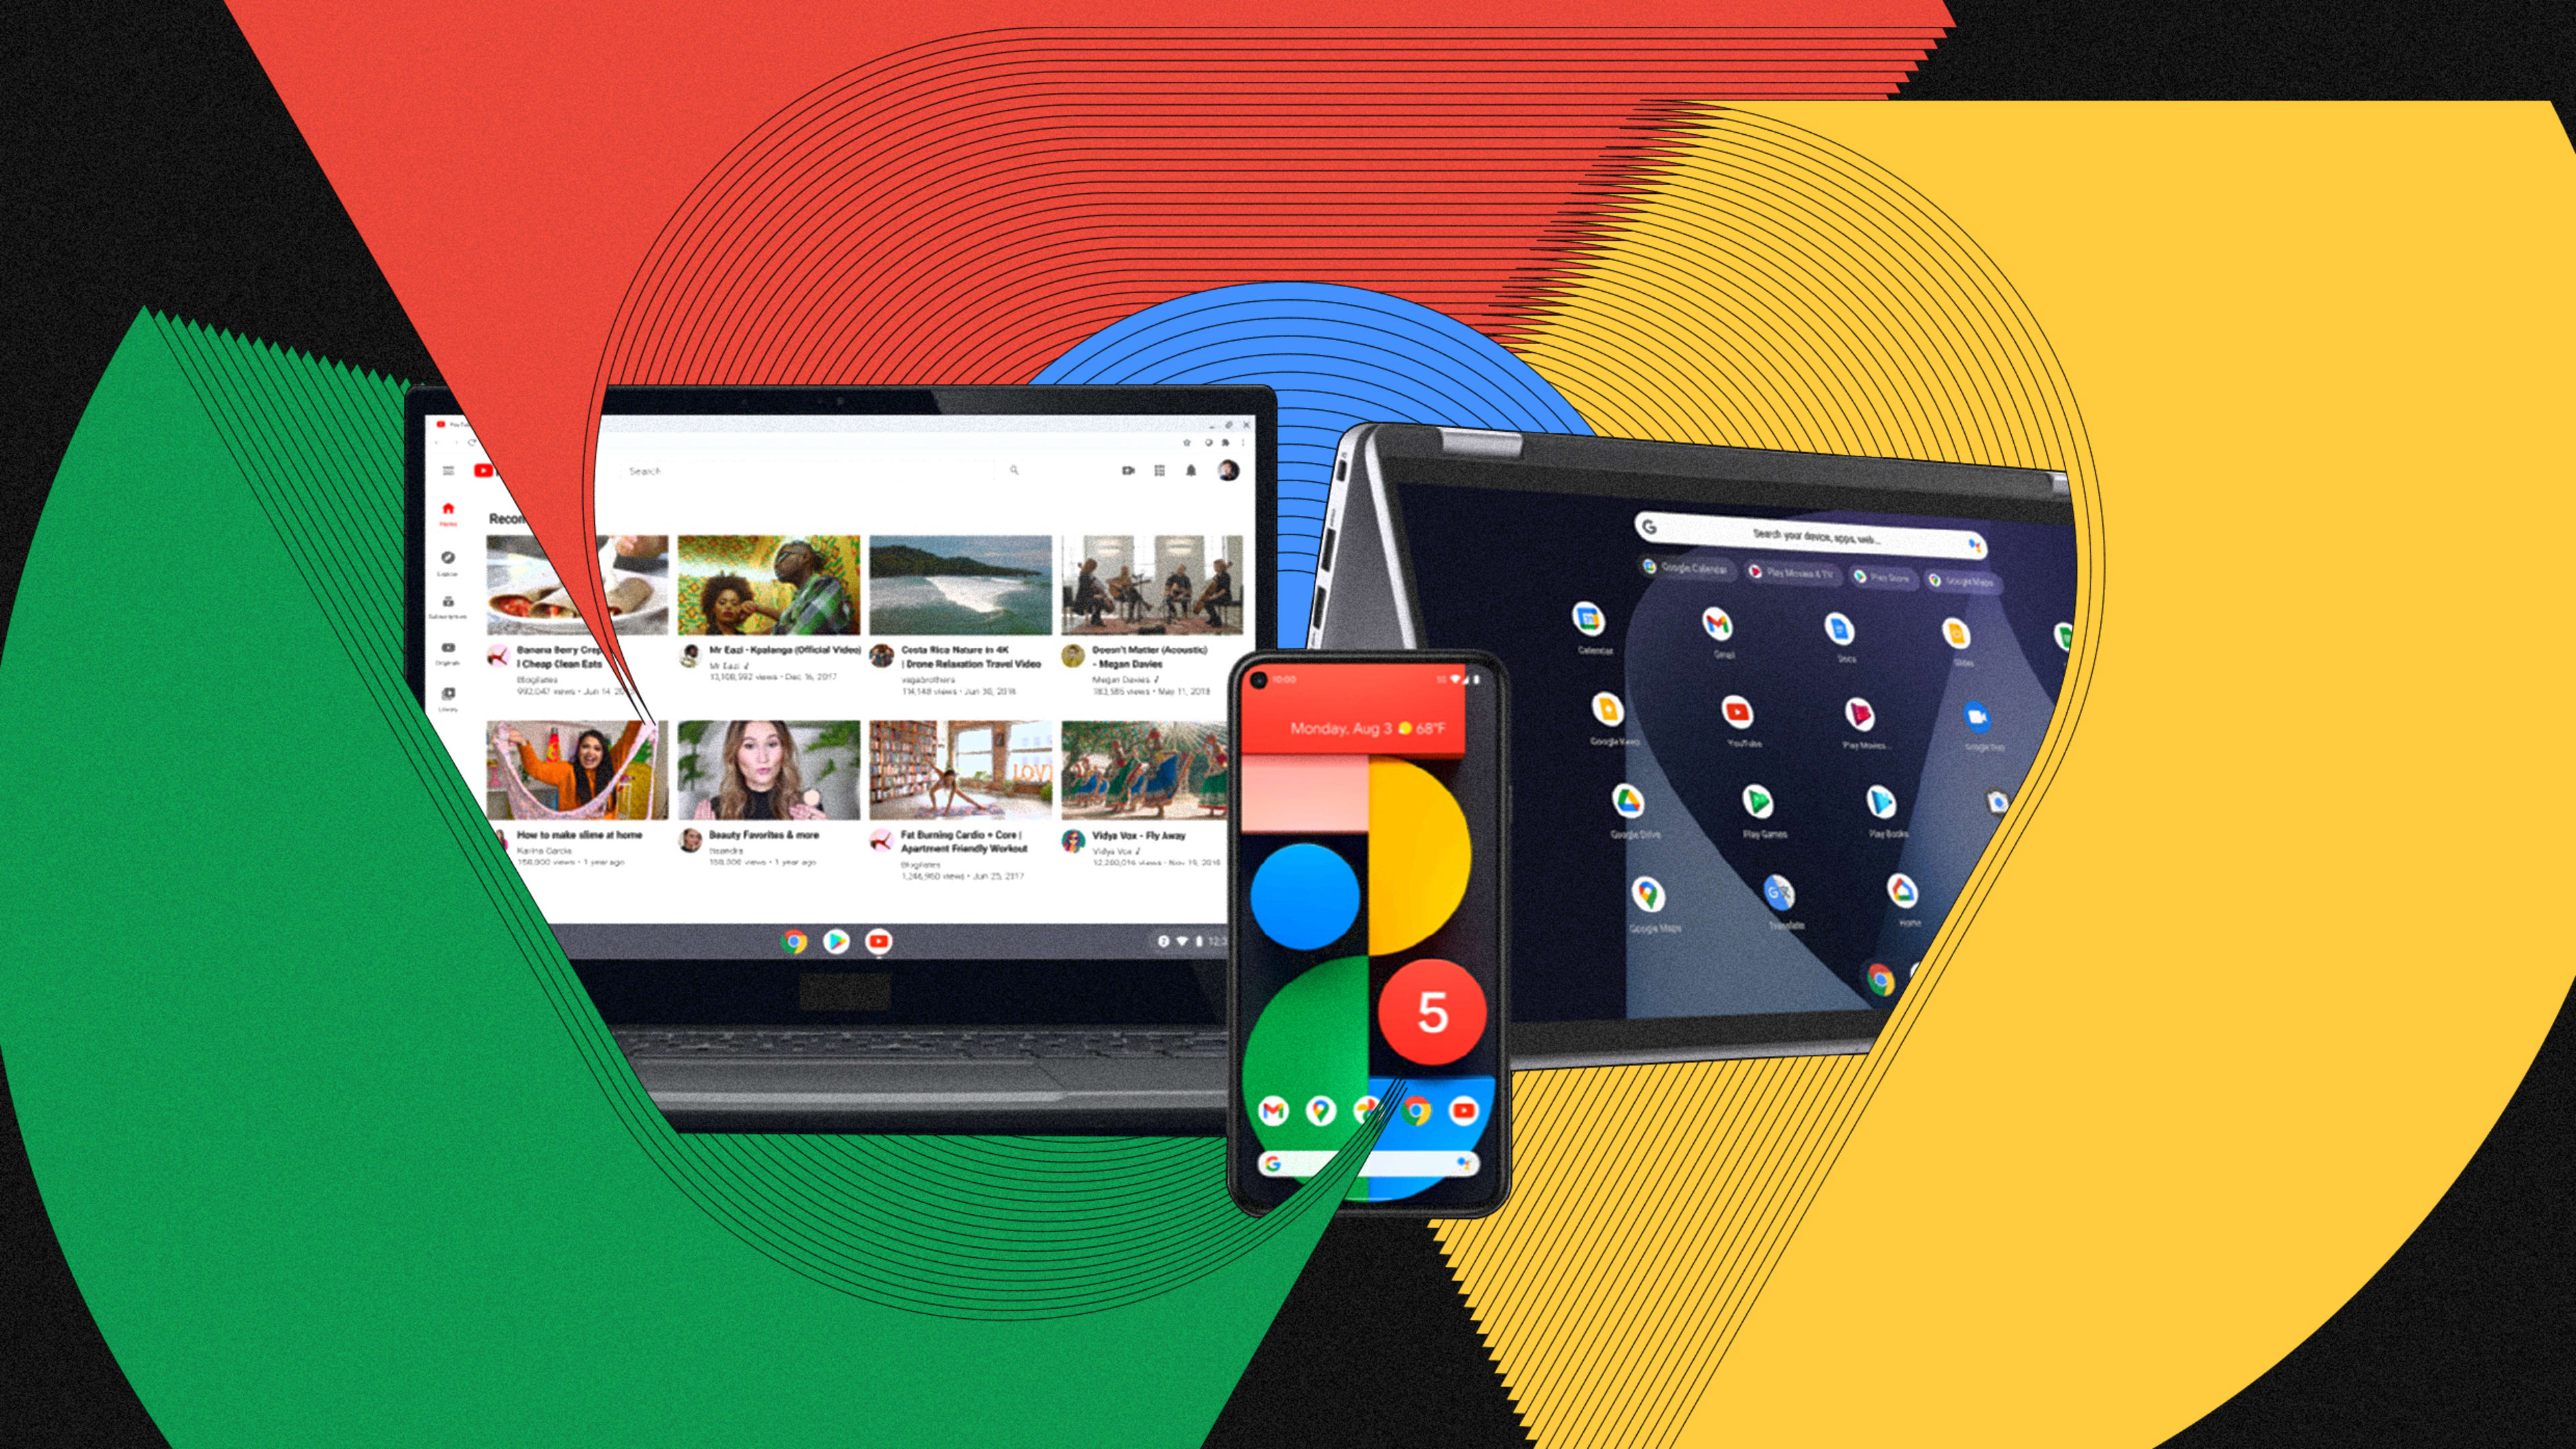 The key insight Google gleaned over 10 years designing Chrome OS